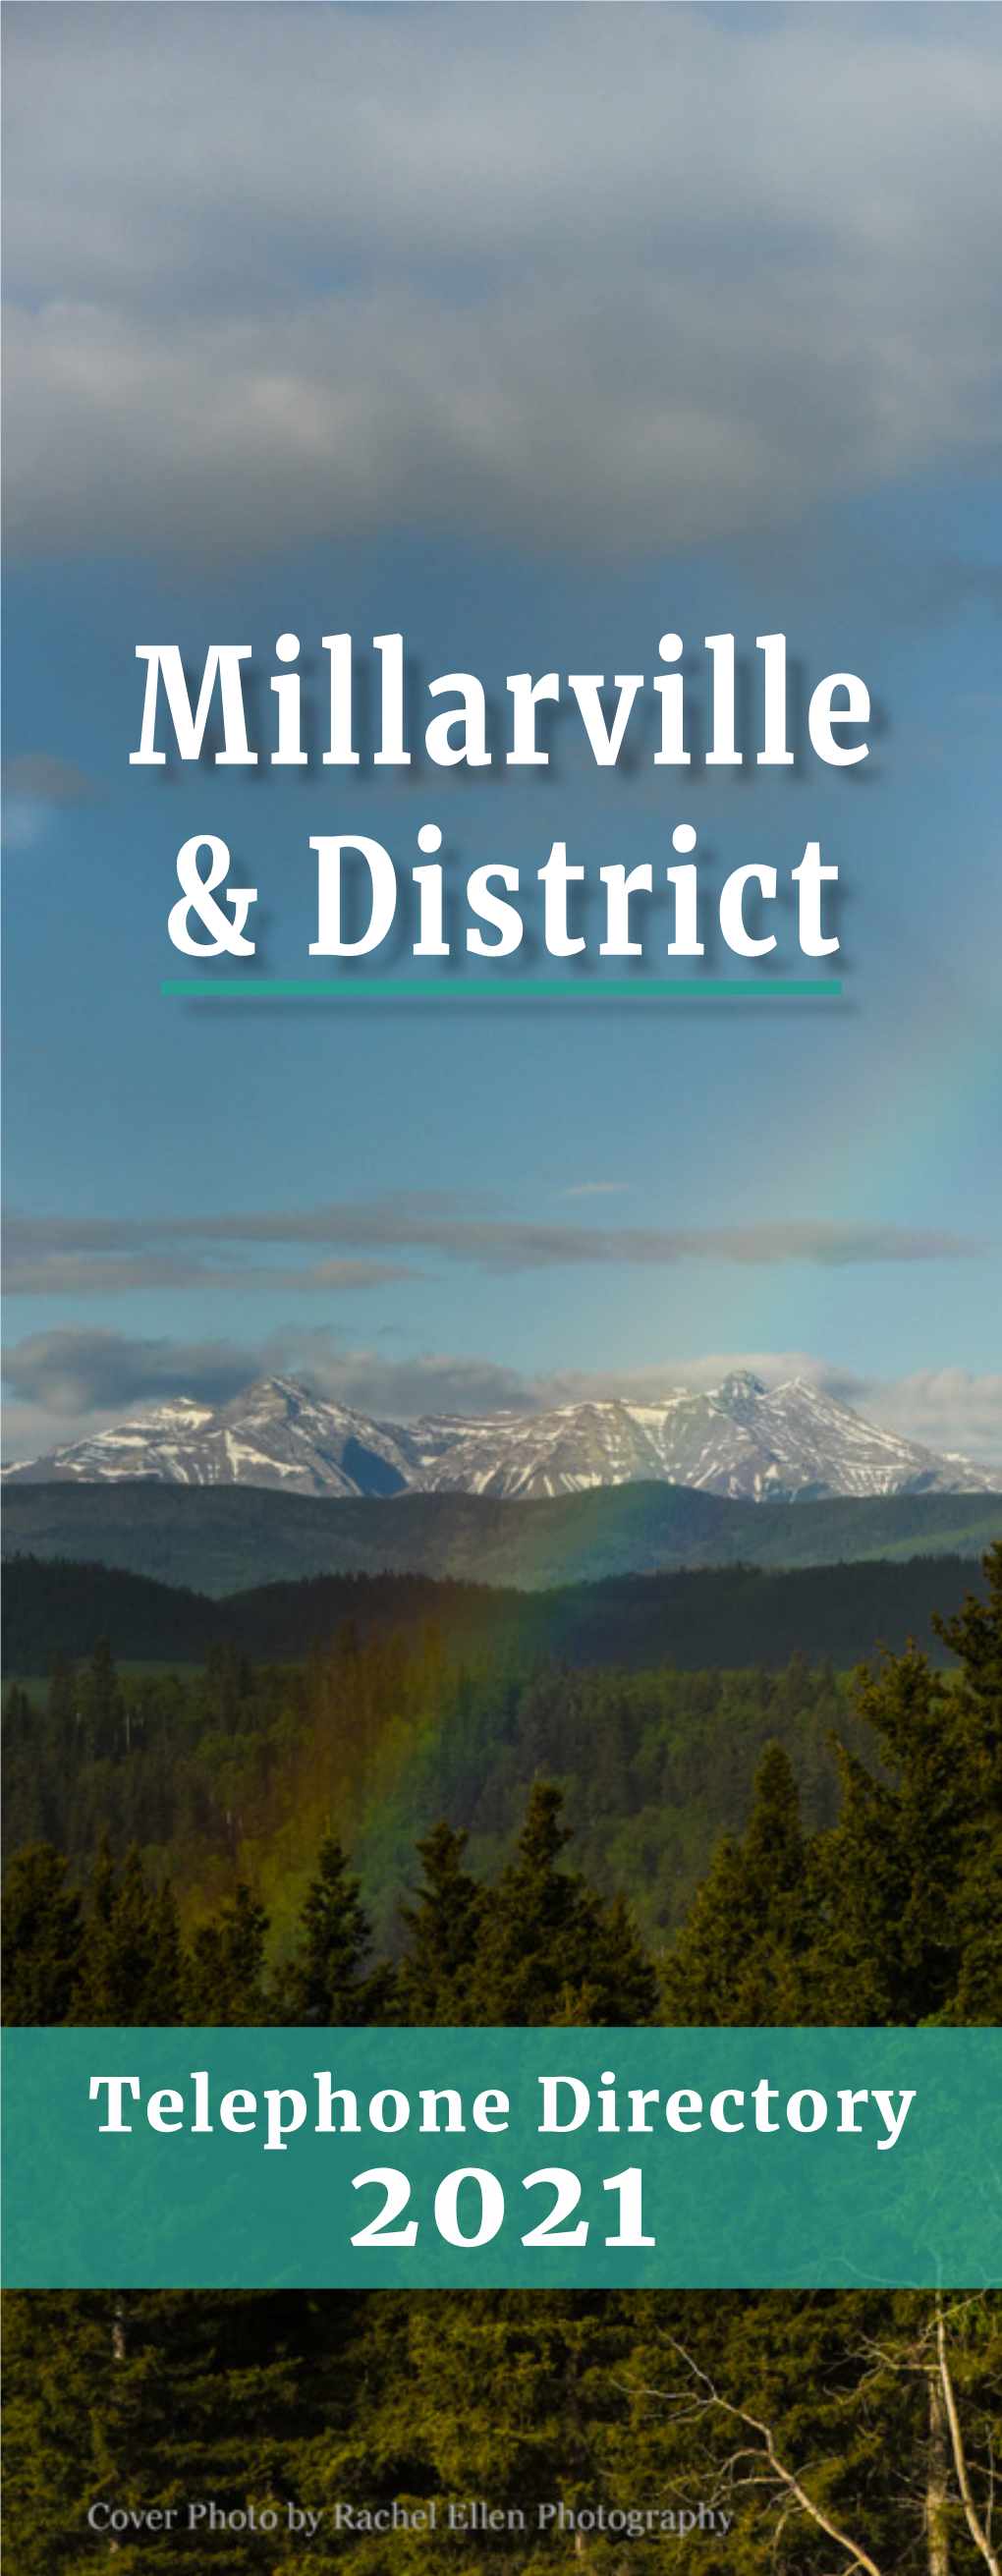 Millarville & District Telephone Directory